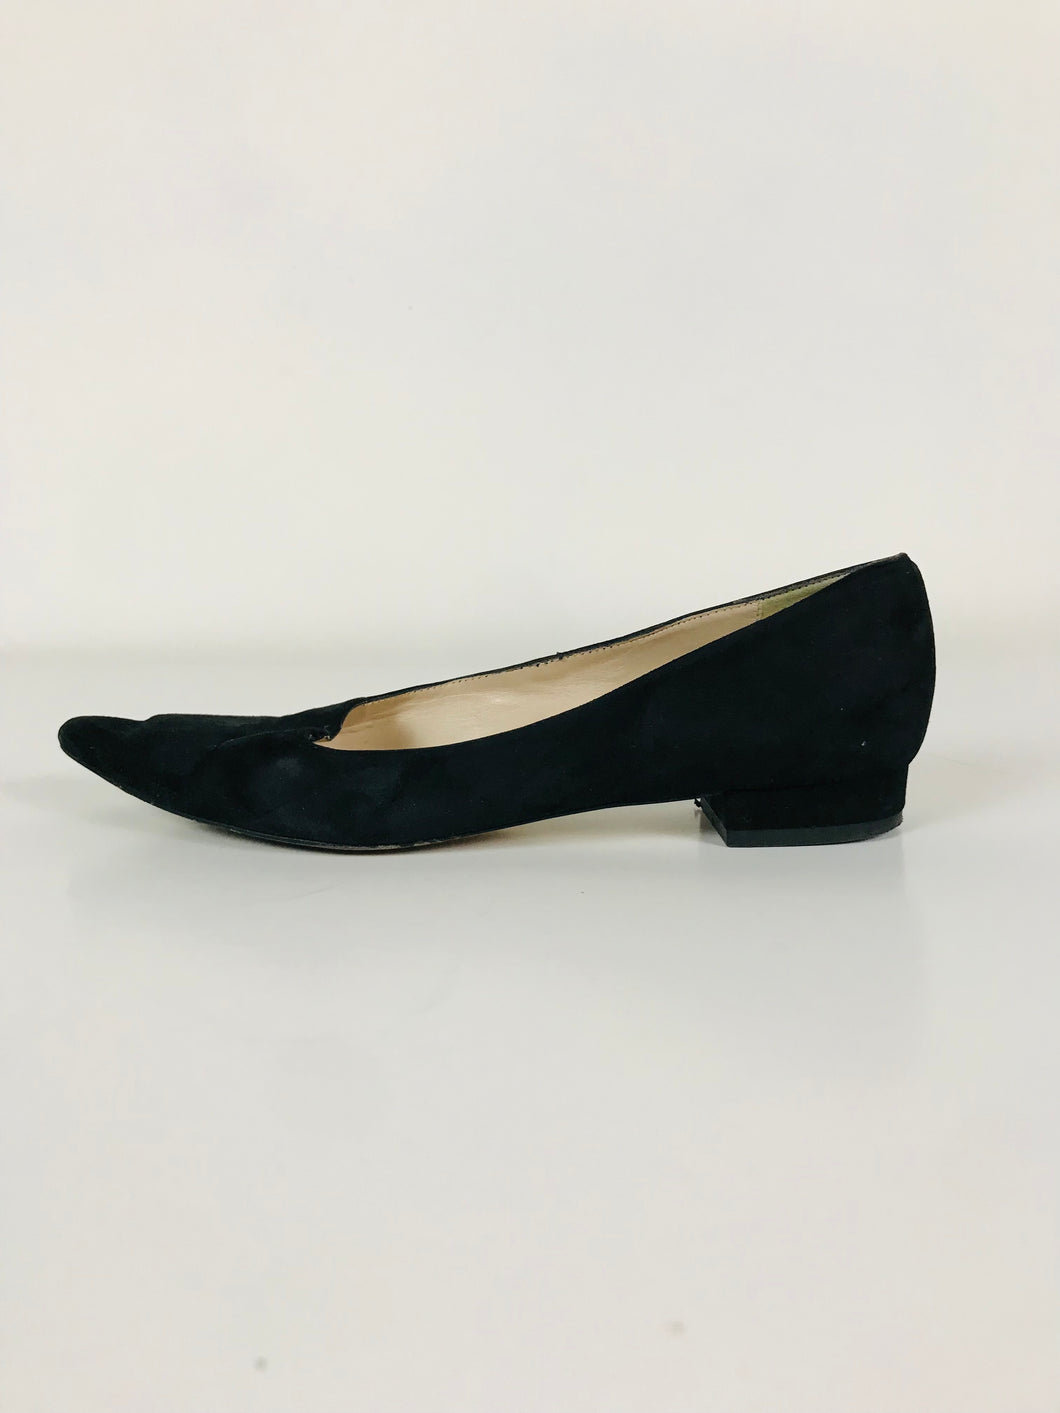 Russell & Bromley Women's Suede Slip-On Pointed Shoes | 37.5 UK4.5 | Black